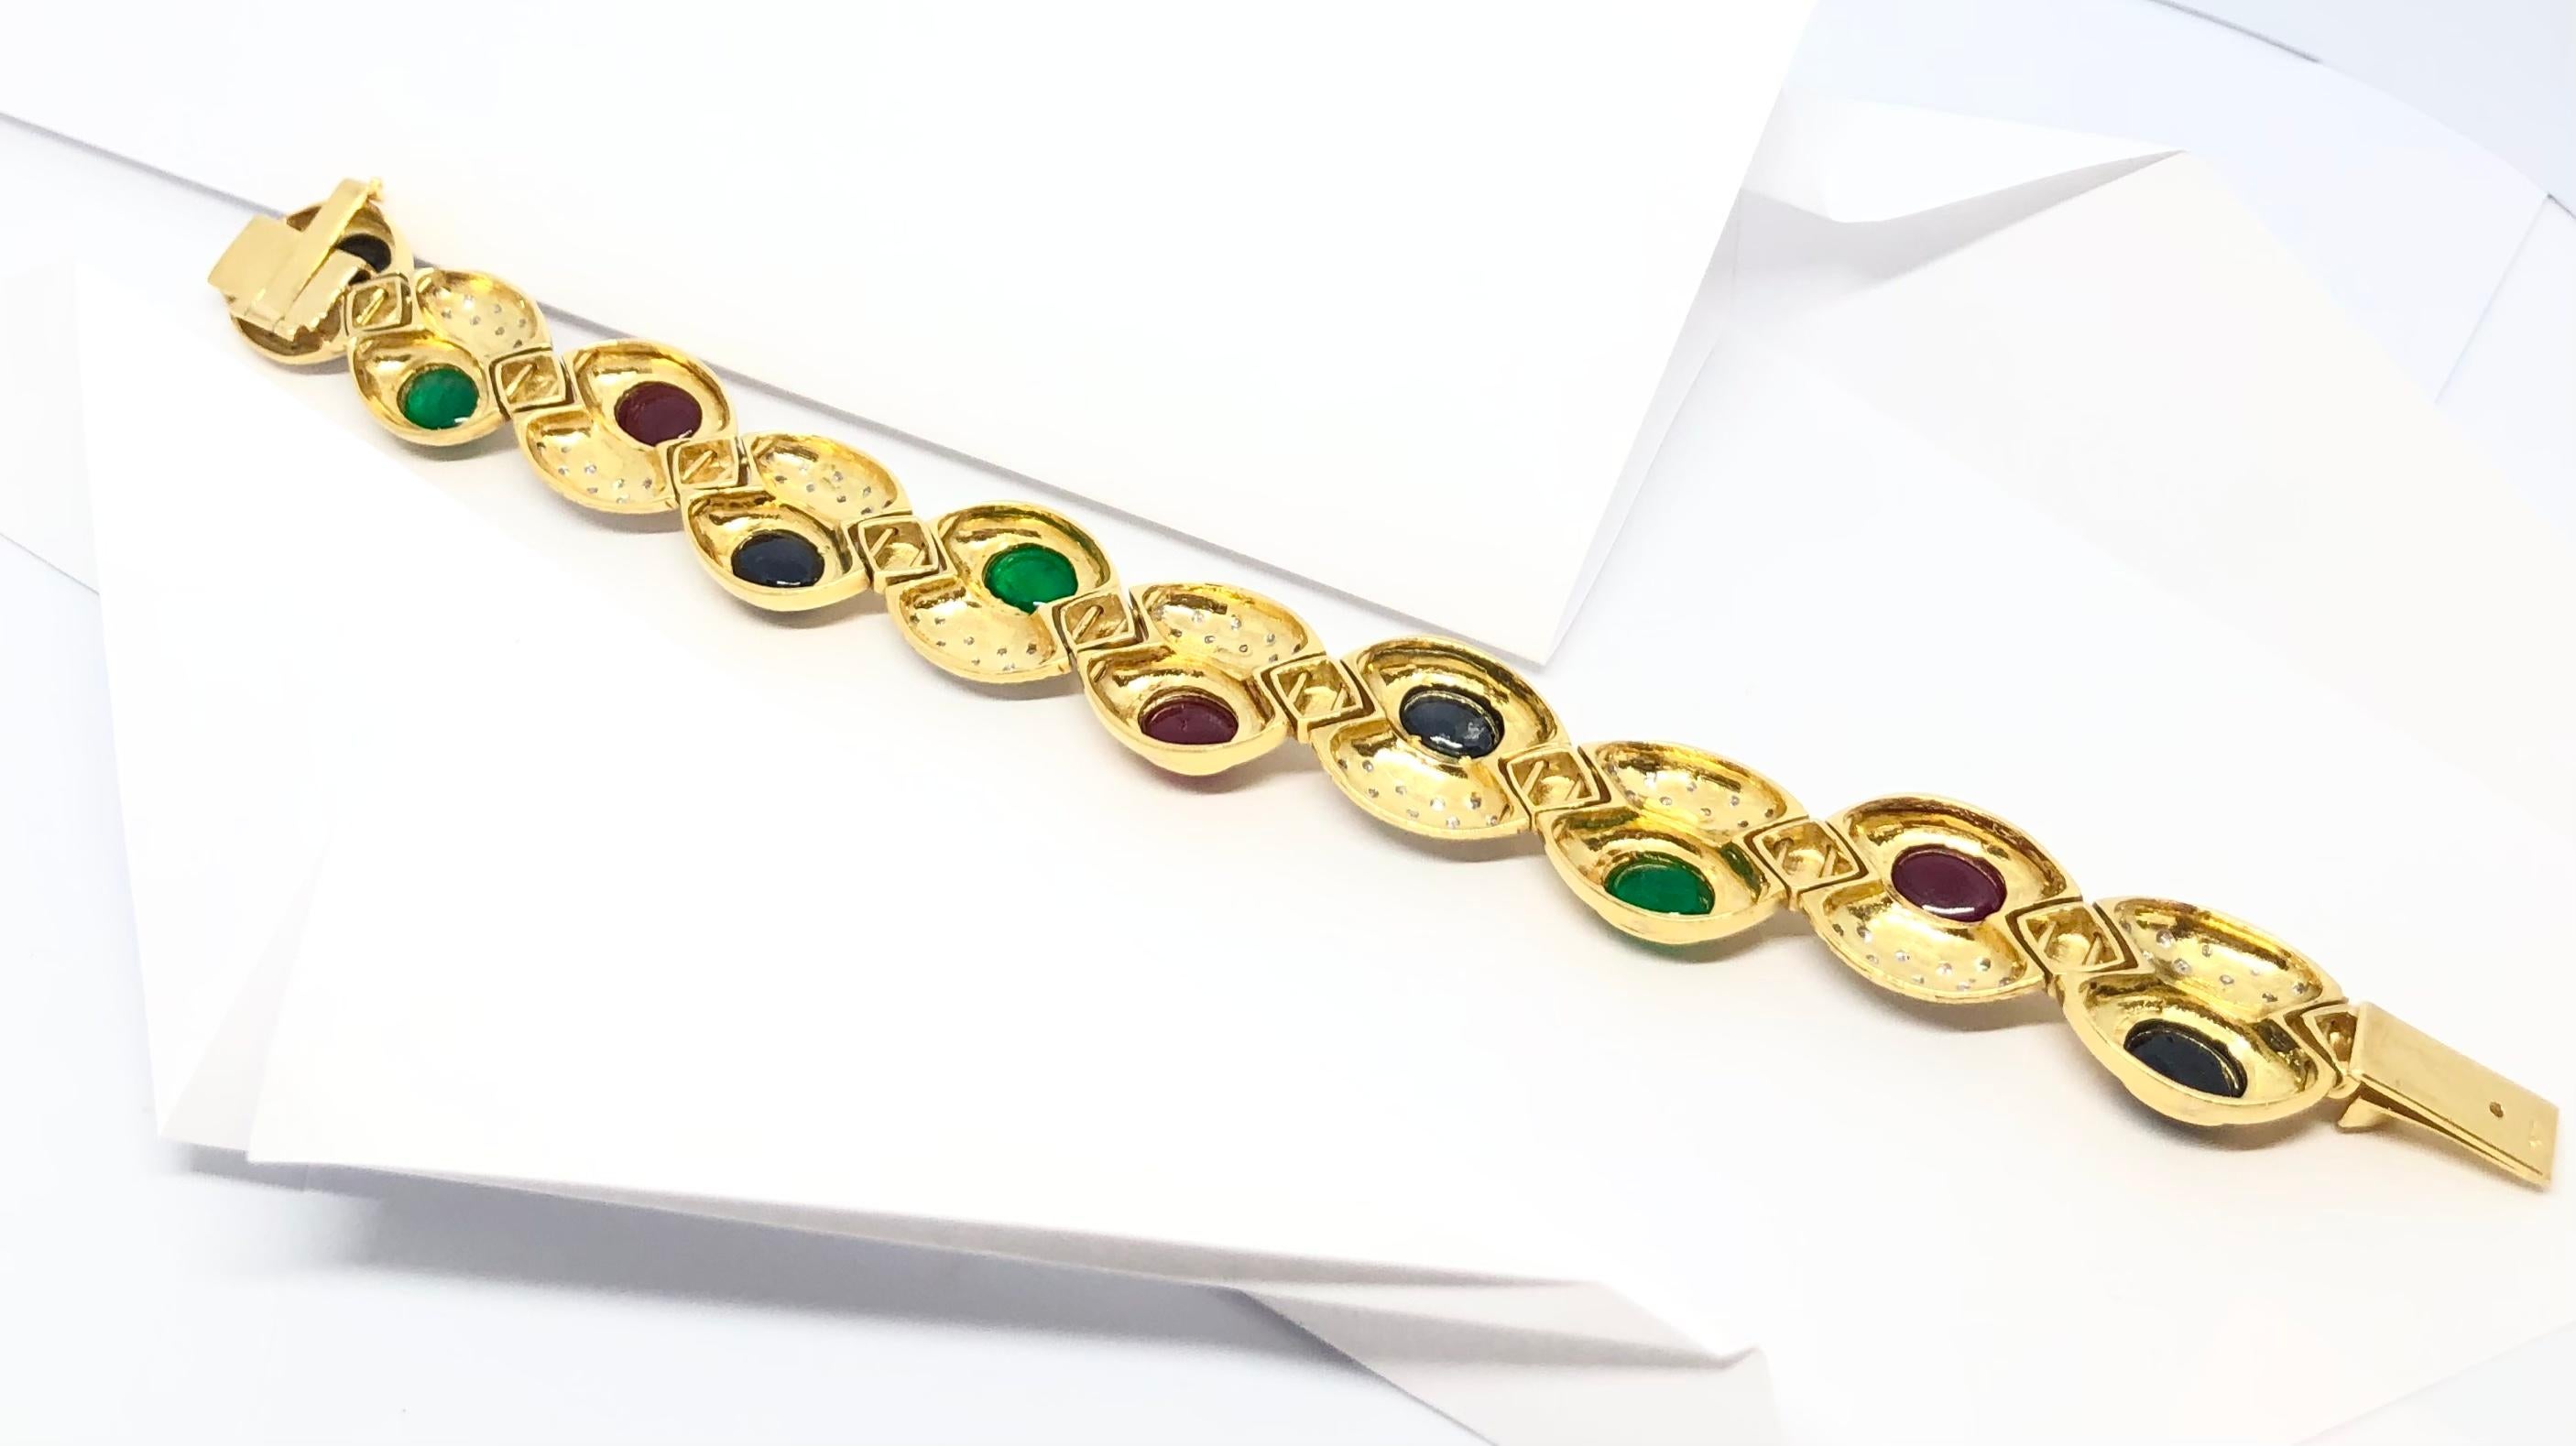 Cabochon Ruby, Emerald, Blue Sapphire with Diamond Bracelet in 18 Karat Gold For Sale 2